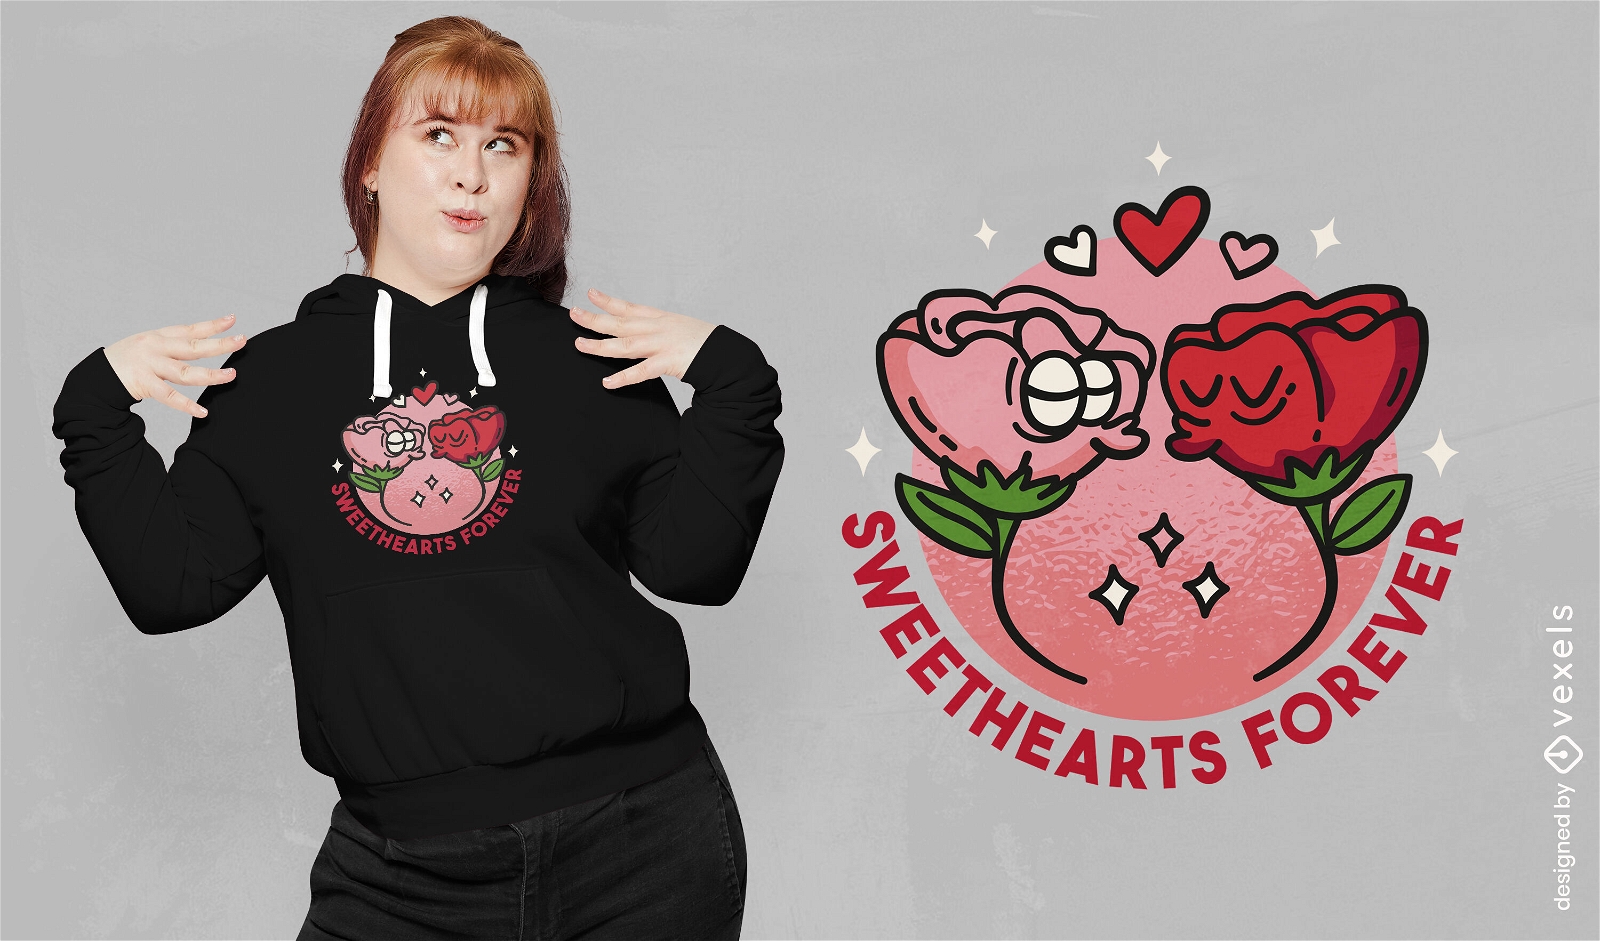 Sweethearts forever t-shirt design